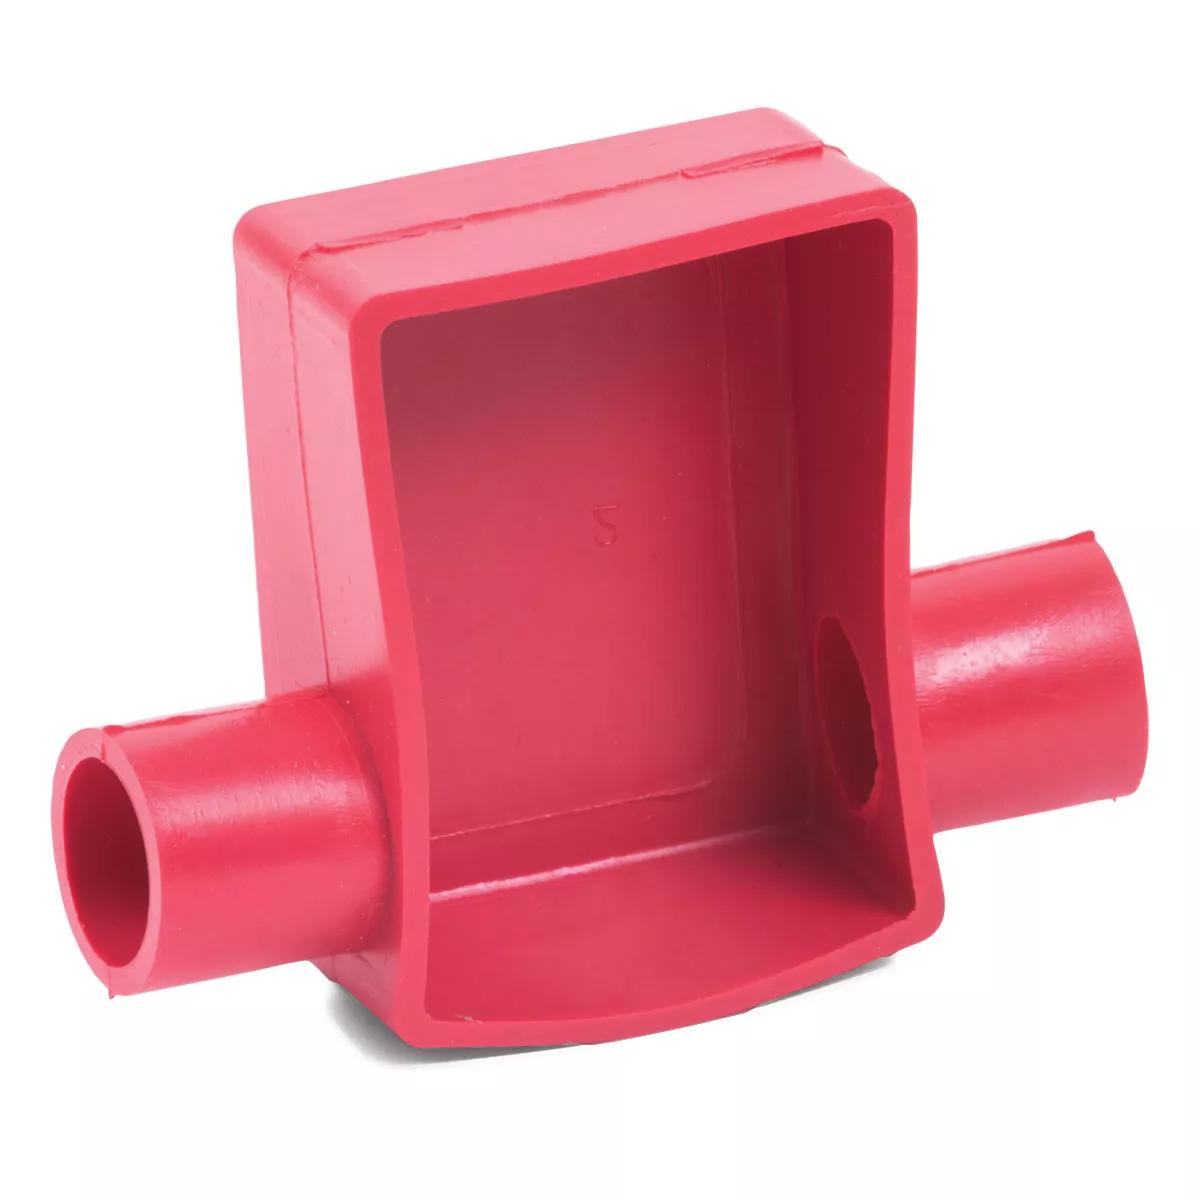 1 - 2 AWG Red Flag Terminal Cover